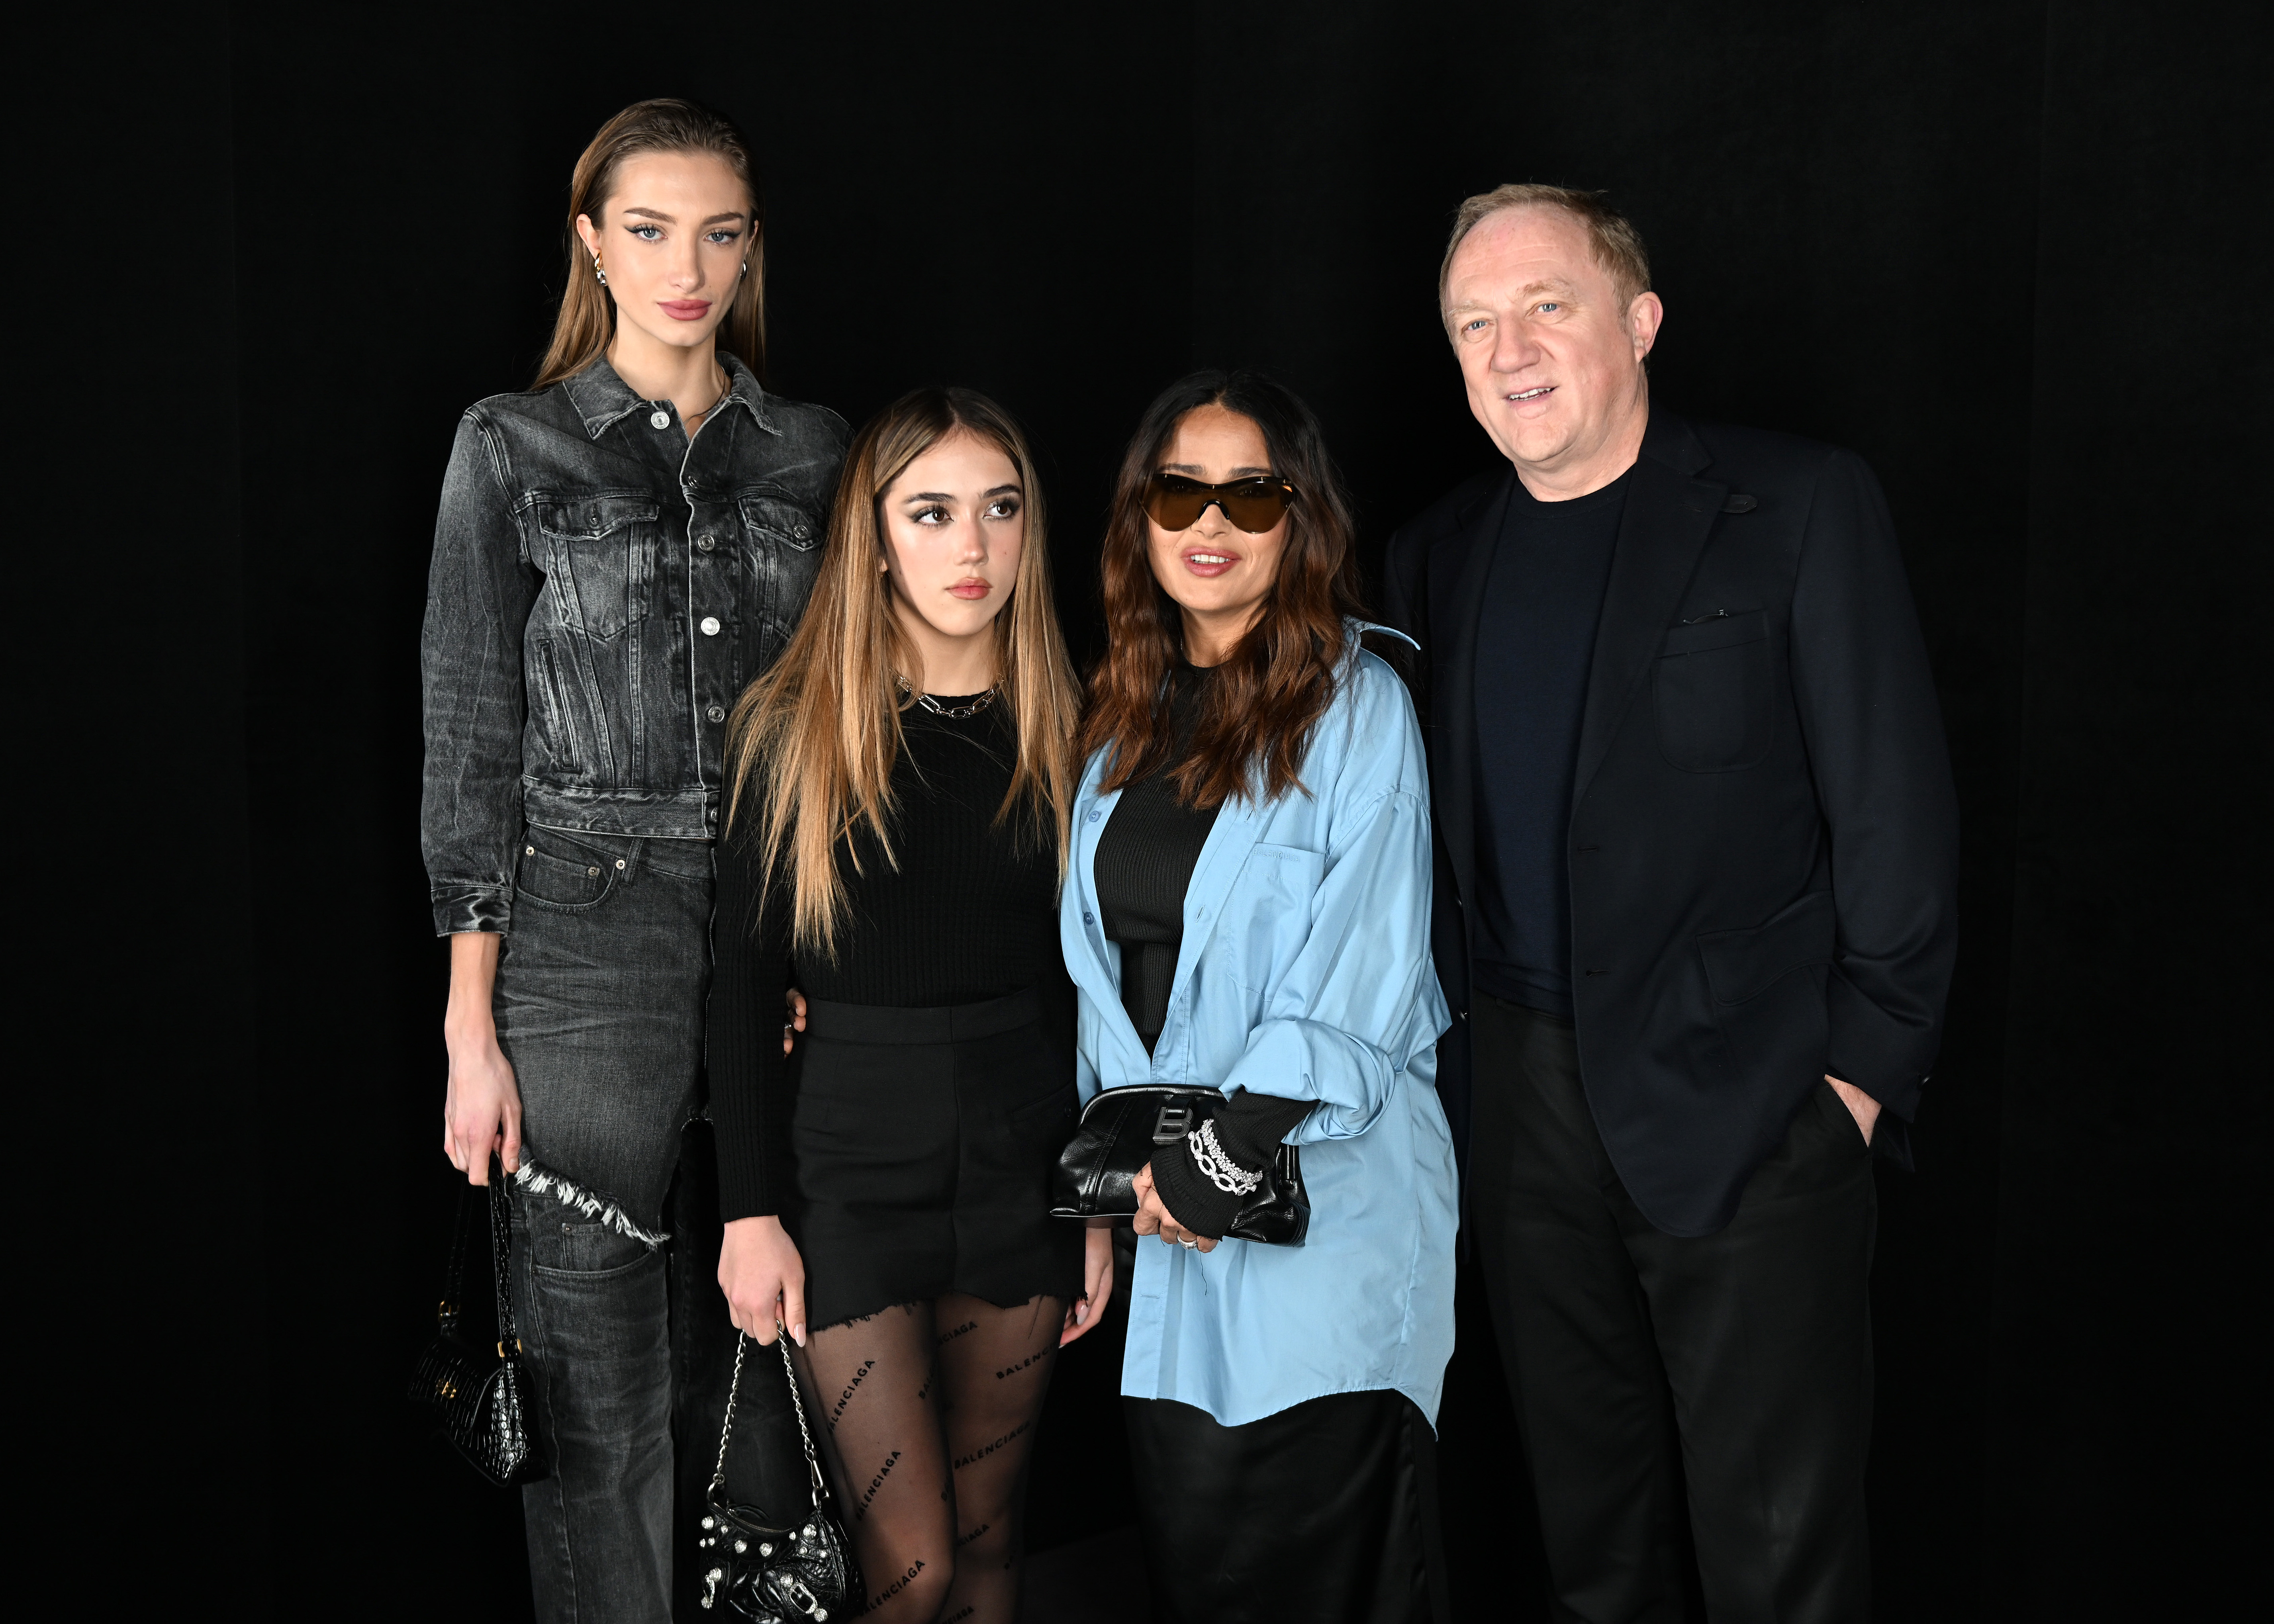 Mathilde Pinault, Valentina Paloma Pinault, Salma Hayek, and François-Henri Pinault in 2022 in Le Bourget, France | Source: Getty Images